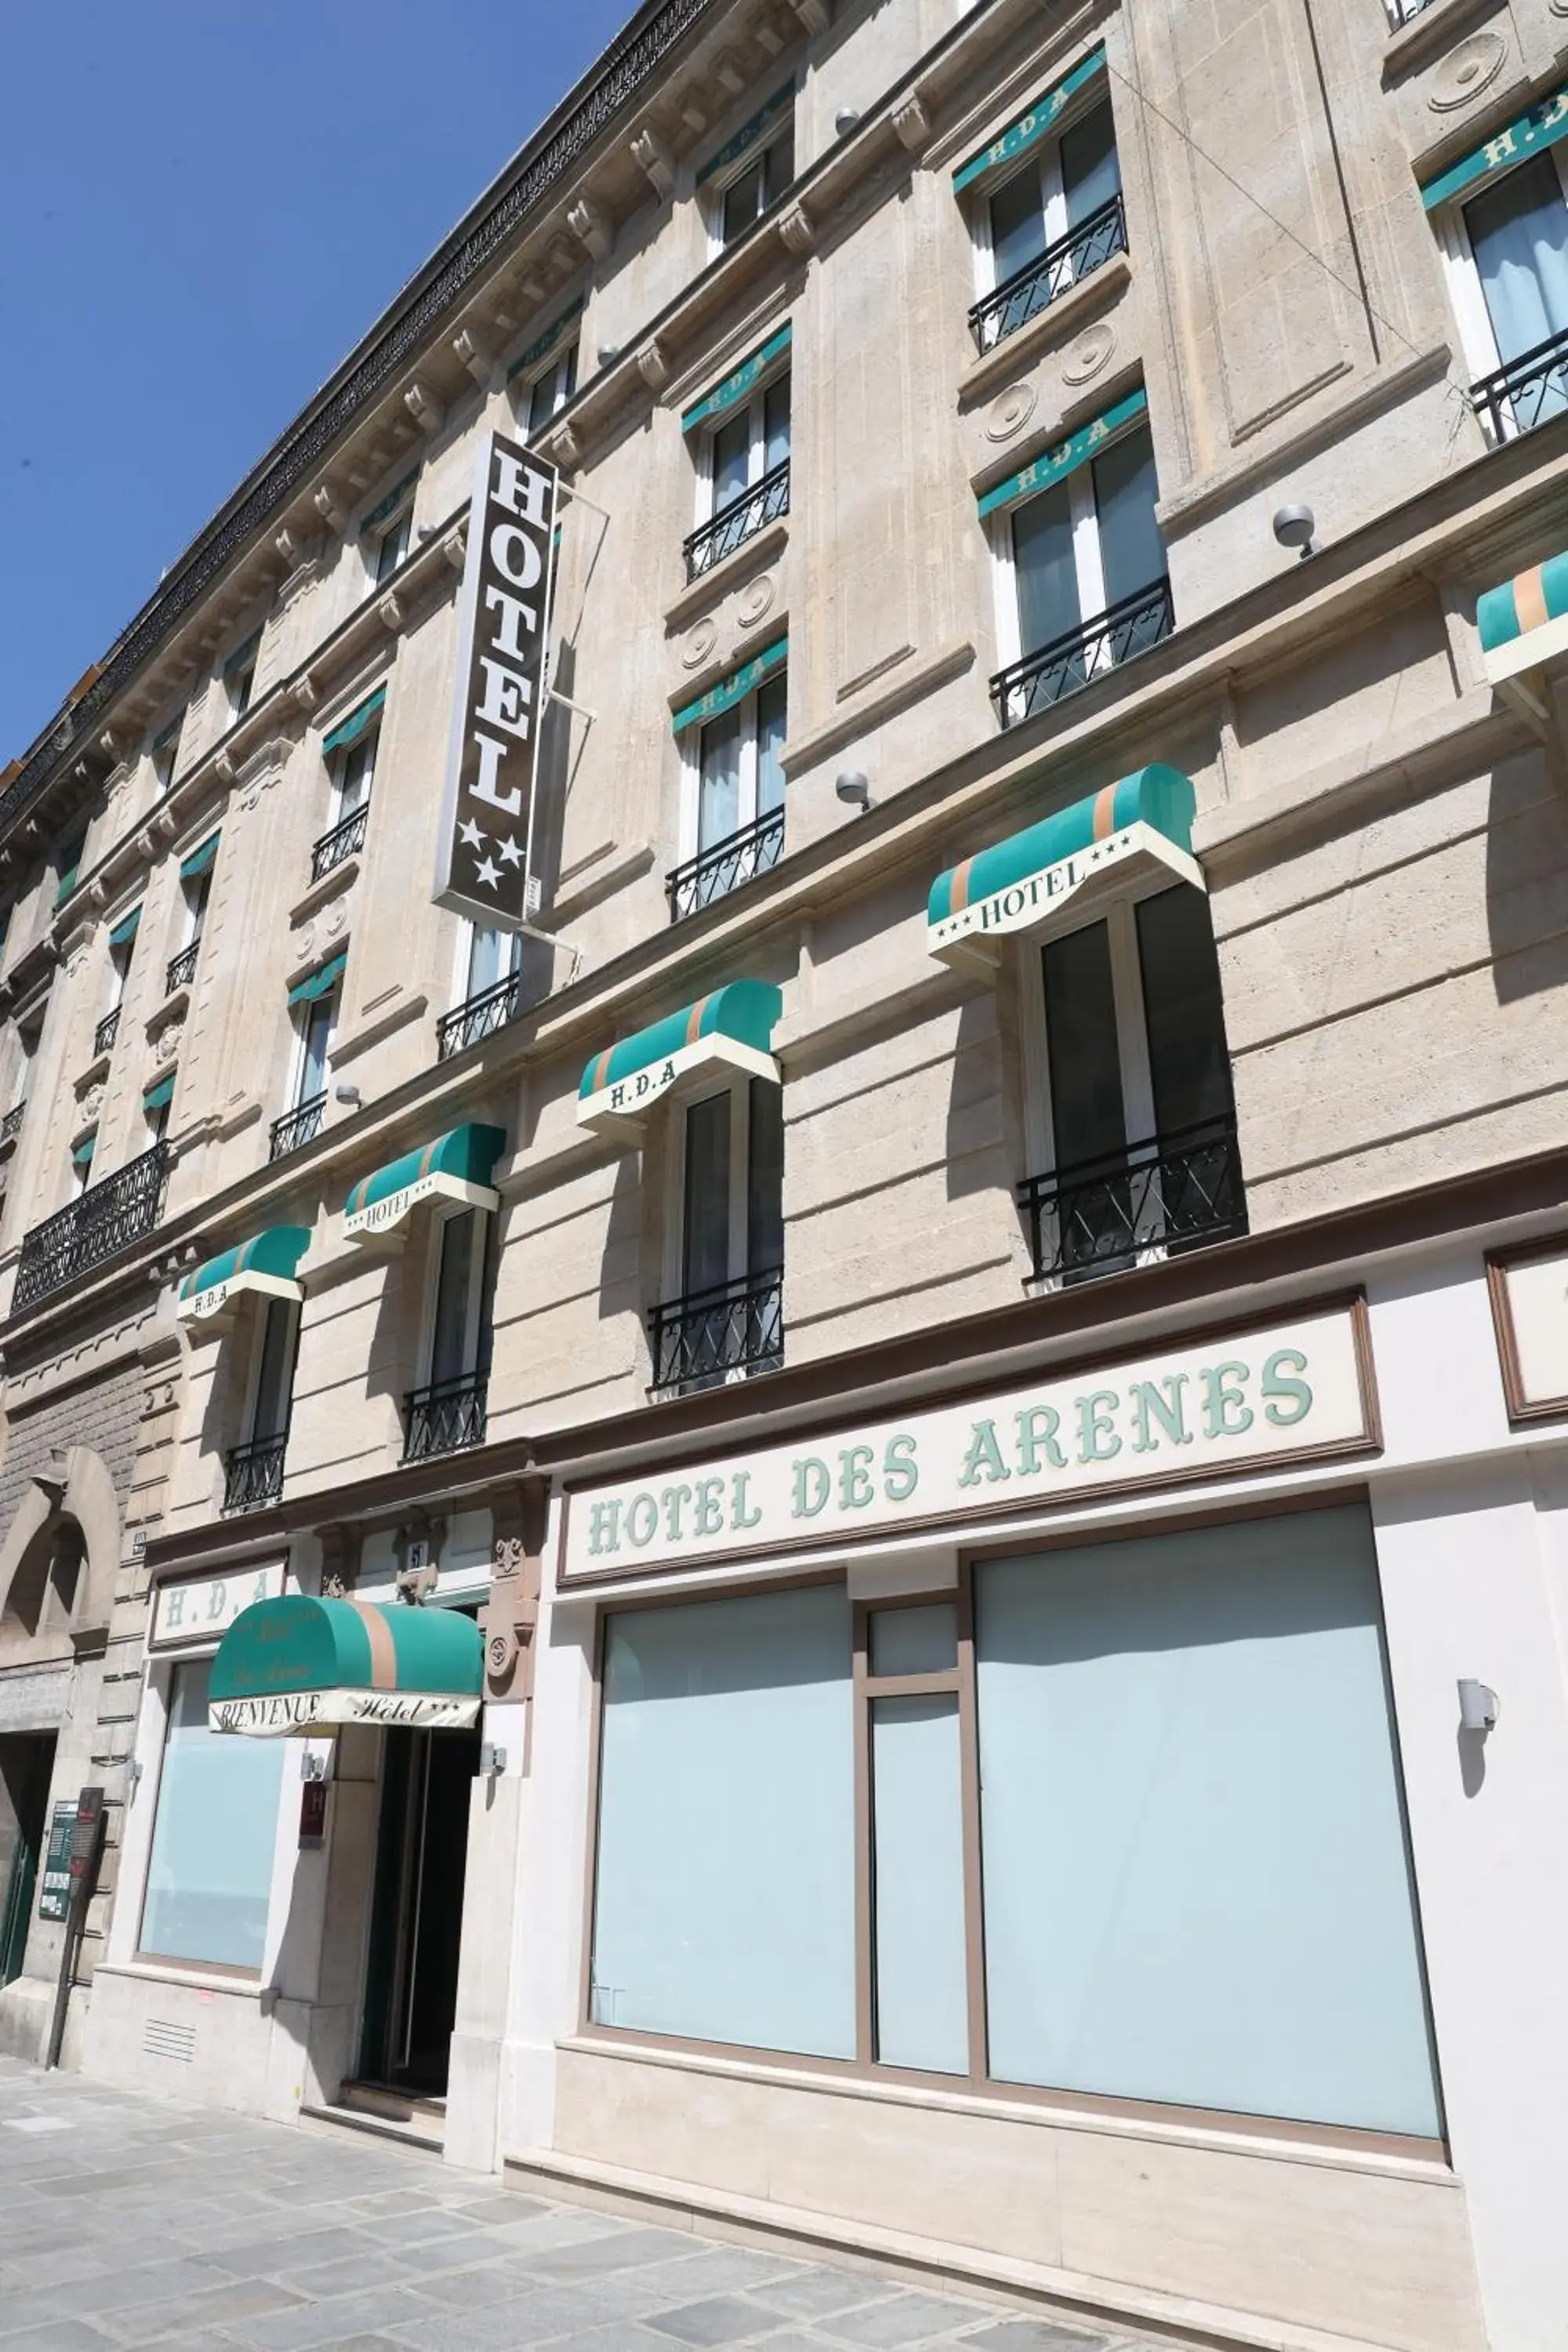 Property Building in Hotel Des Arenes